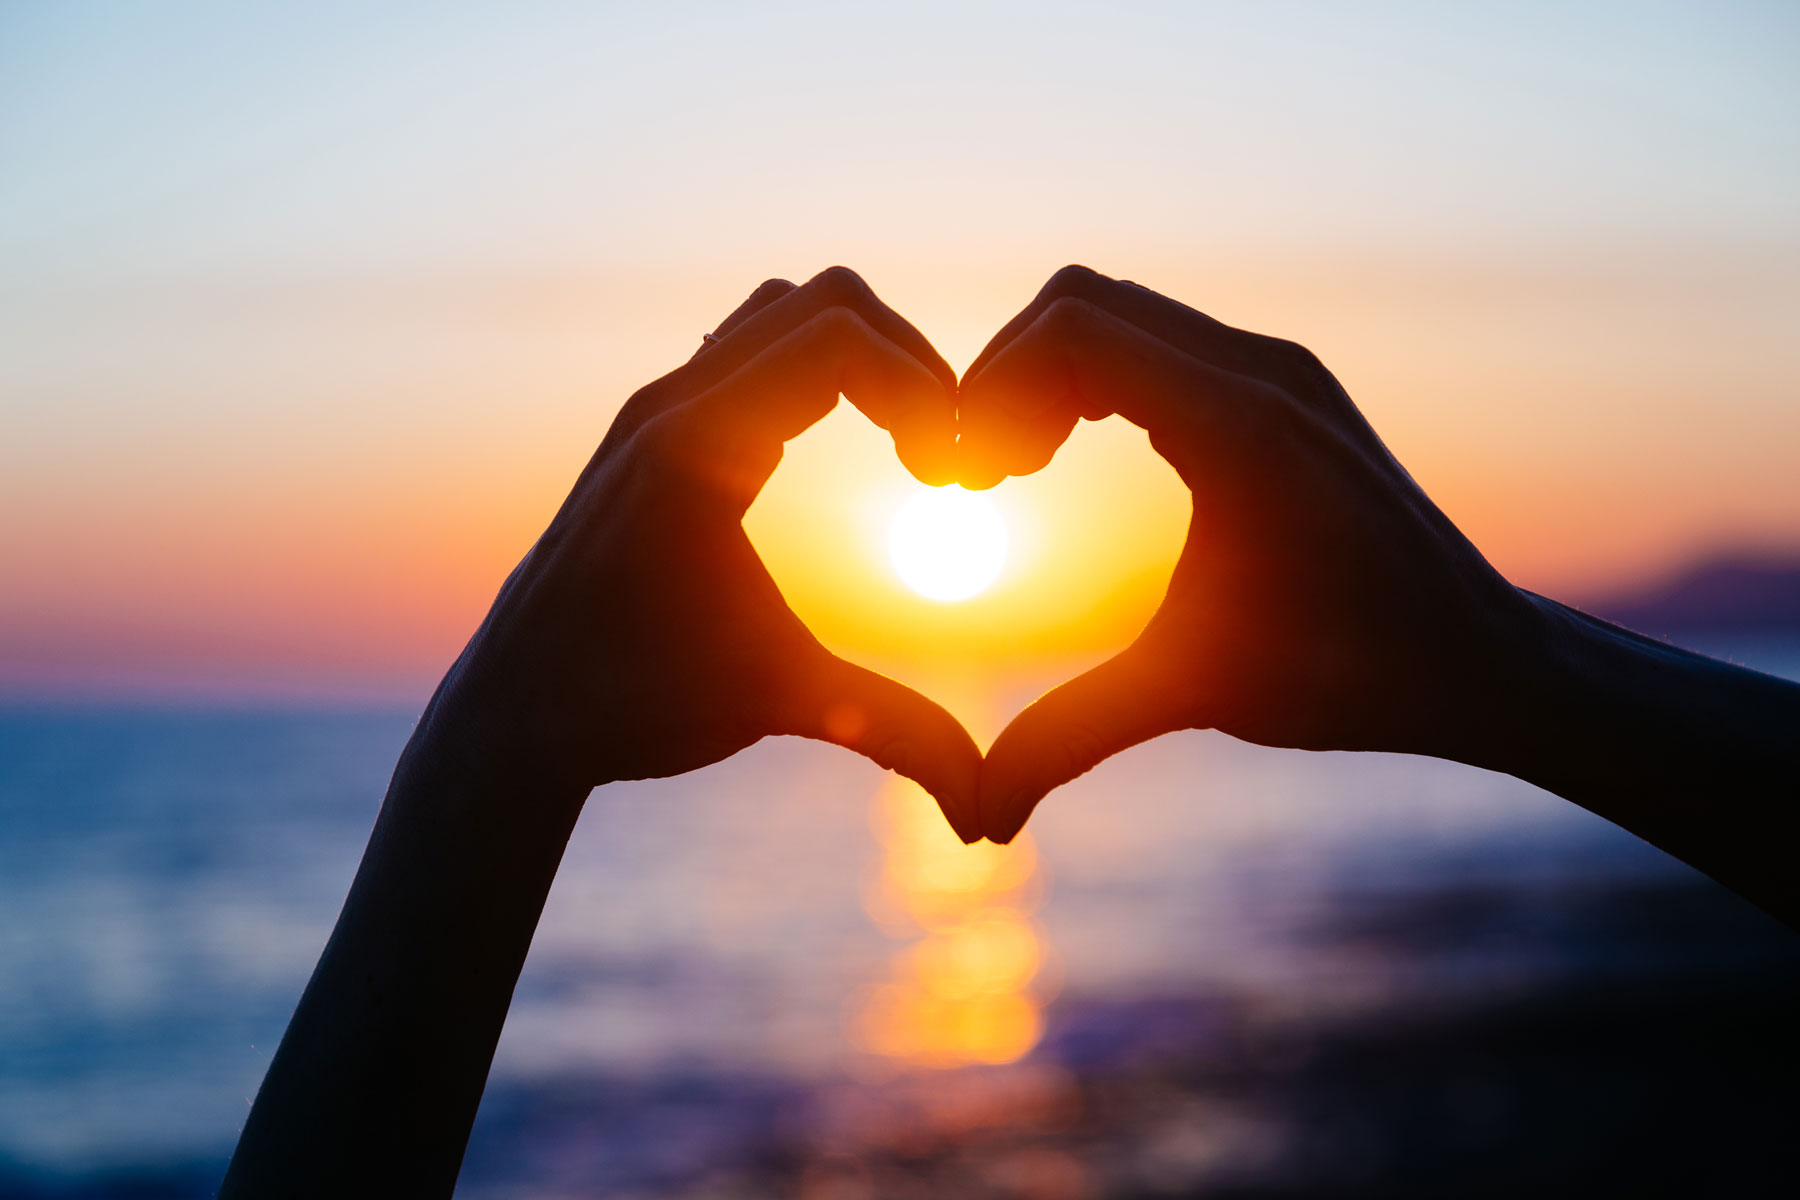 hands-forming-a-heart-shape-with-sunset-silhouette-636379014_5472x3648